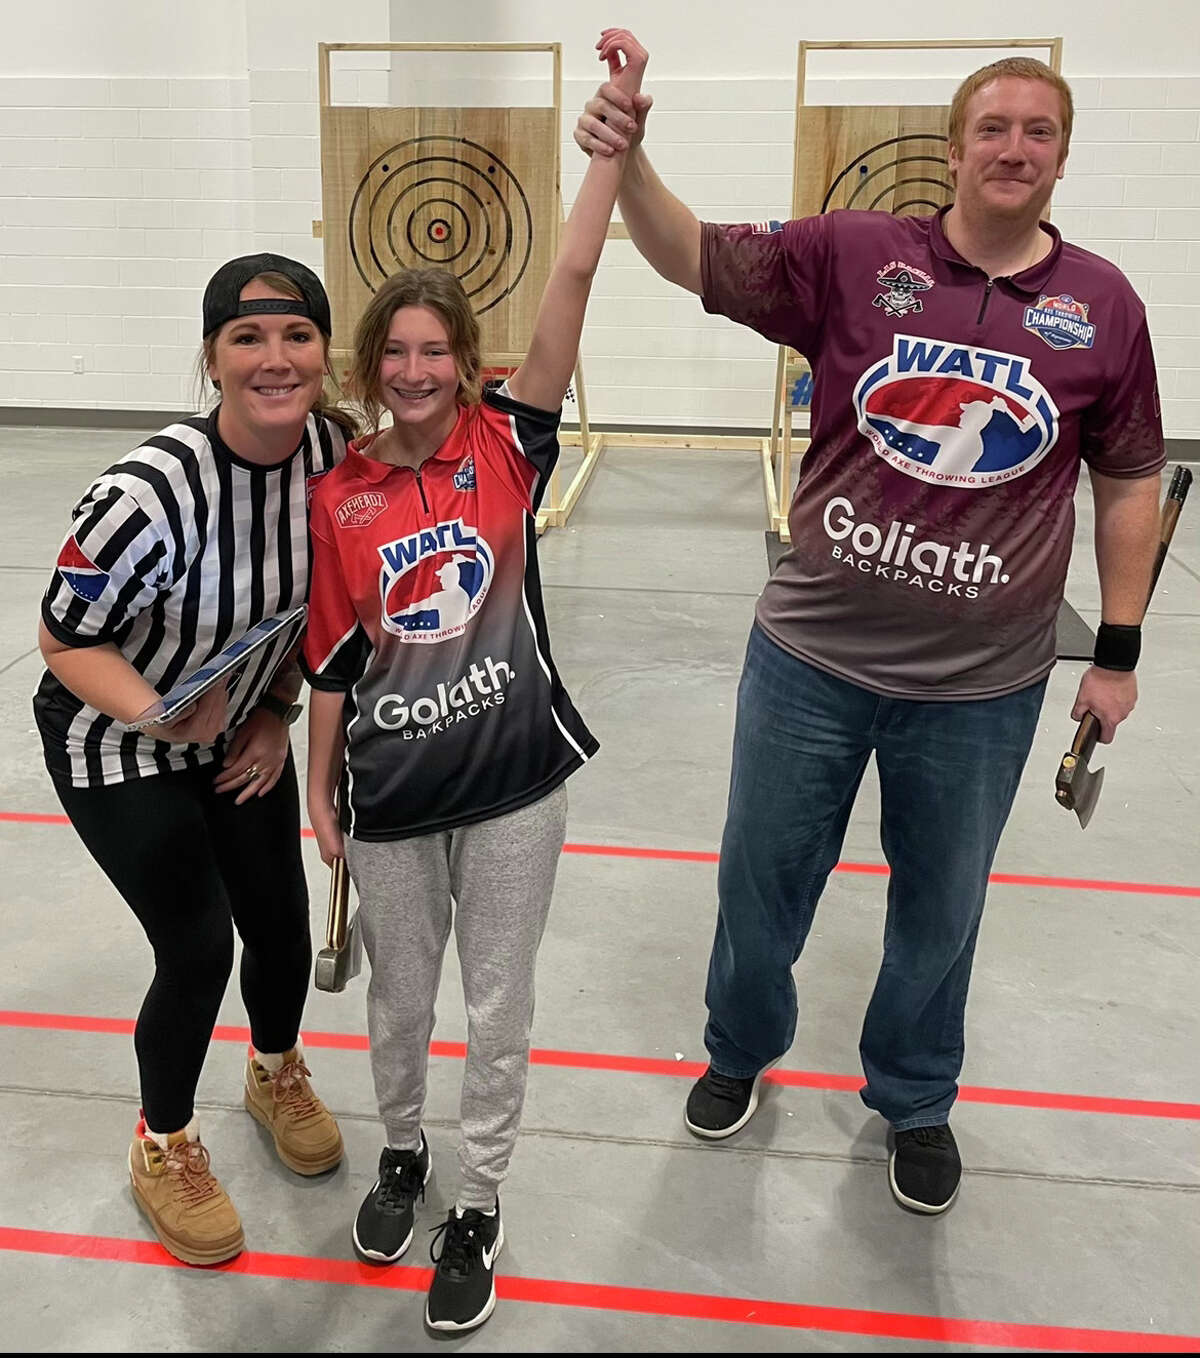 Josselyn Allen, 14, of Jerseyville attends the World Axe Throwing League World Axe Throwing Championship in Appleton, Wisconsin. She celebrates after her first match against Mark Tishko, the U.S. champion in hatchet. Judge Kasey Jennings (left) is a friend and sponsor.